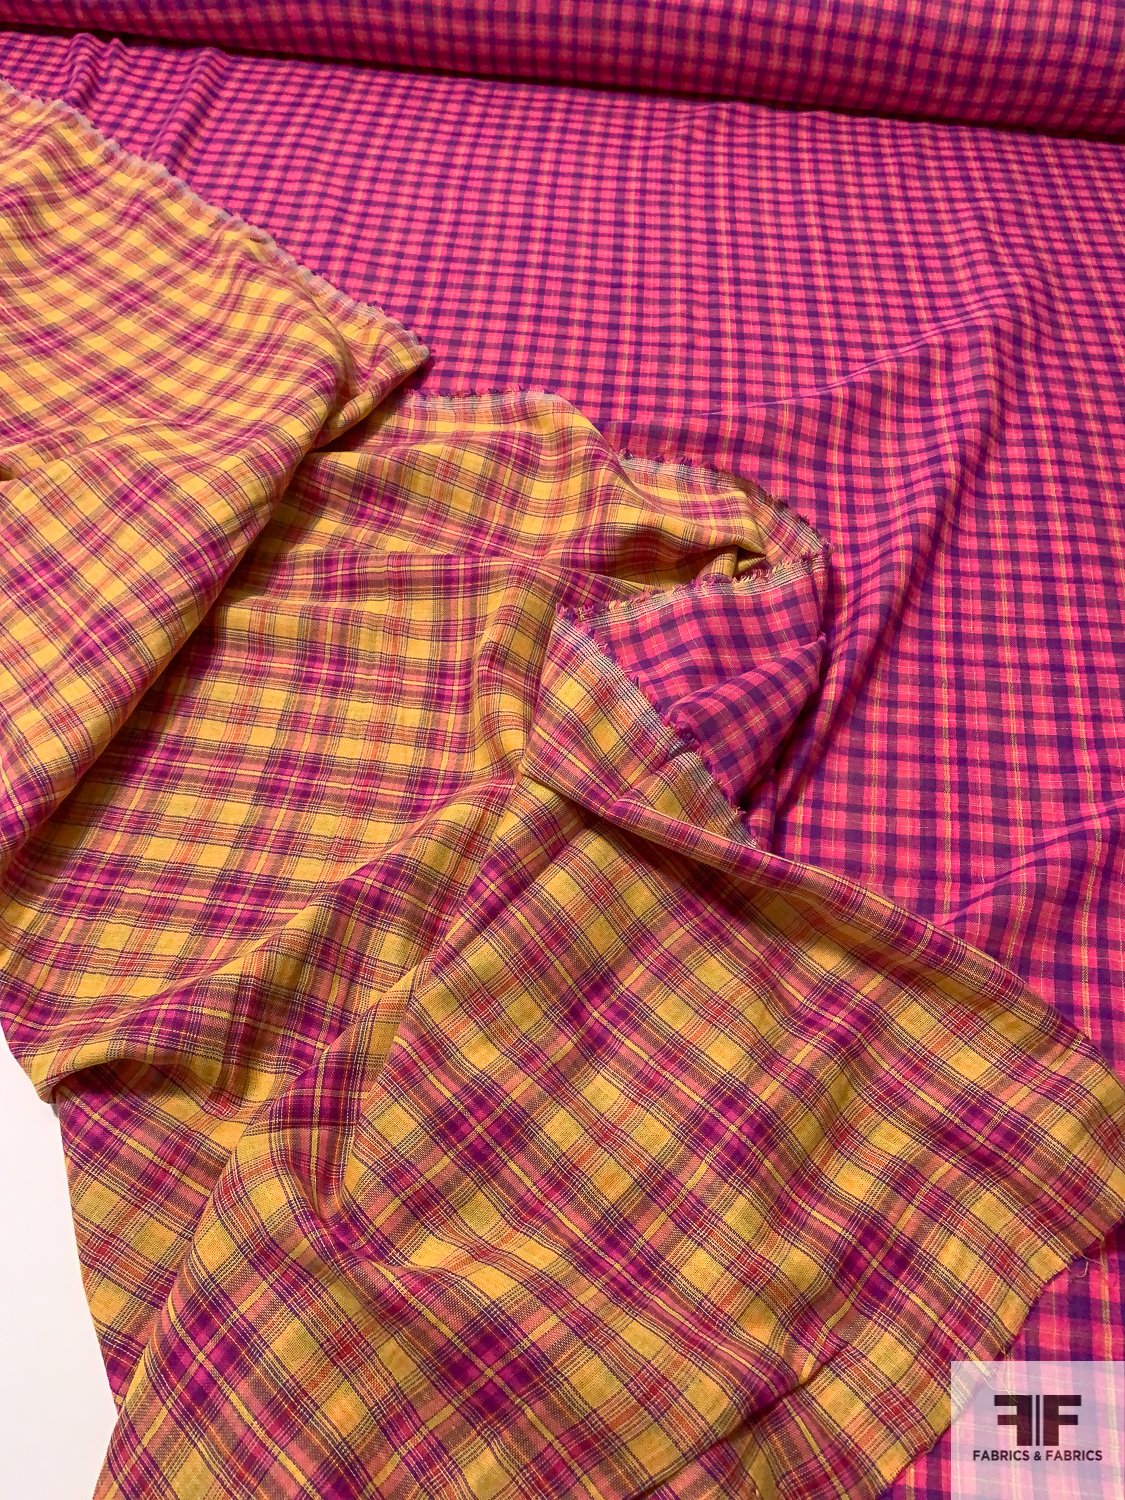 2-Ply Double Sided Plaid Cotton Voile - Hot Pink / Purple / Yellow